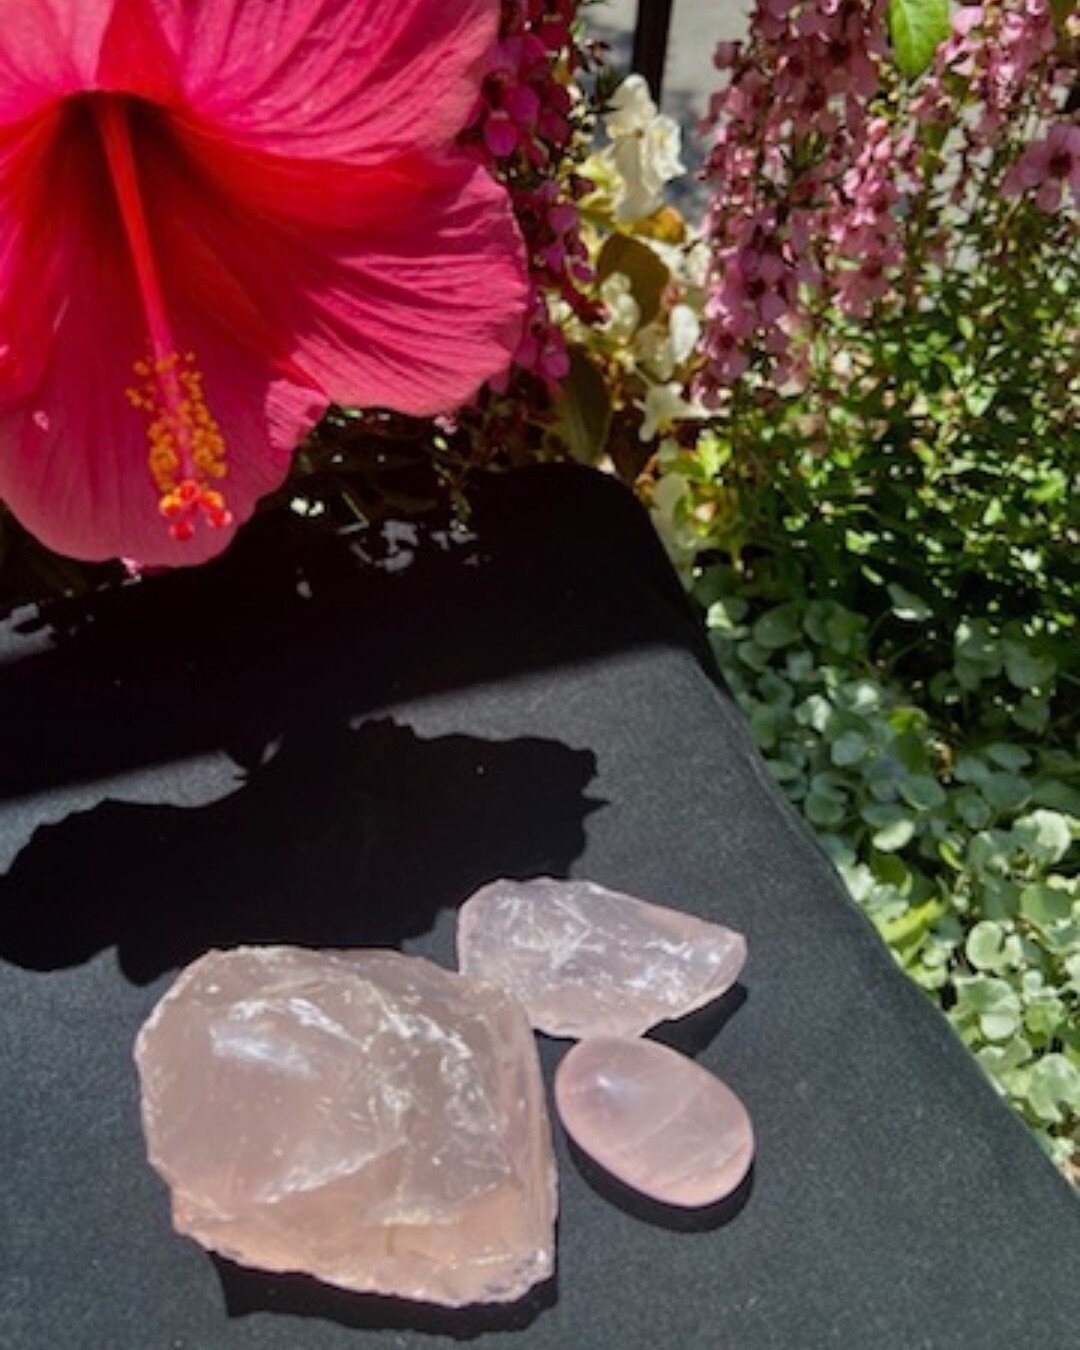 Rose quartz invigorates Qi and thus moves &quot;Blood.&quot; Addresses emotional and inflammatory issues. Helps us open our hearts, be softer and gentler, while retaining our outer protection. Opens the chest.

Stone of unconditional love and infinit